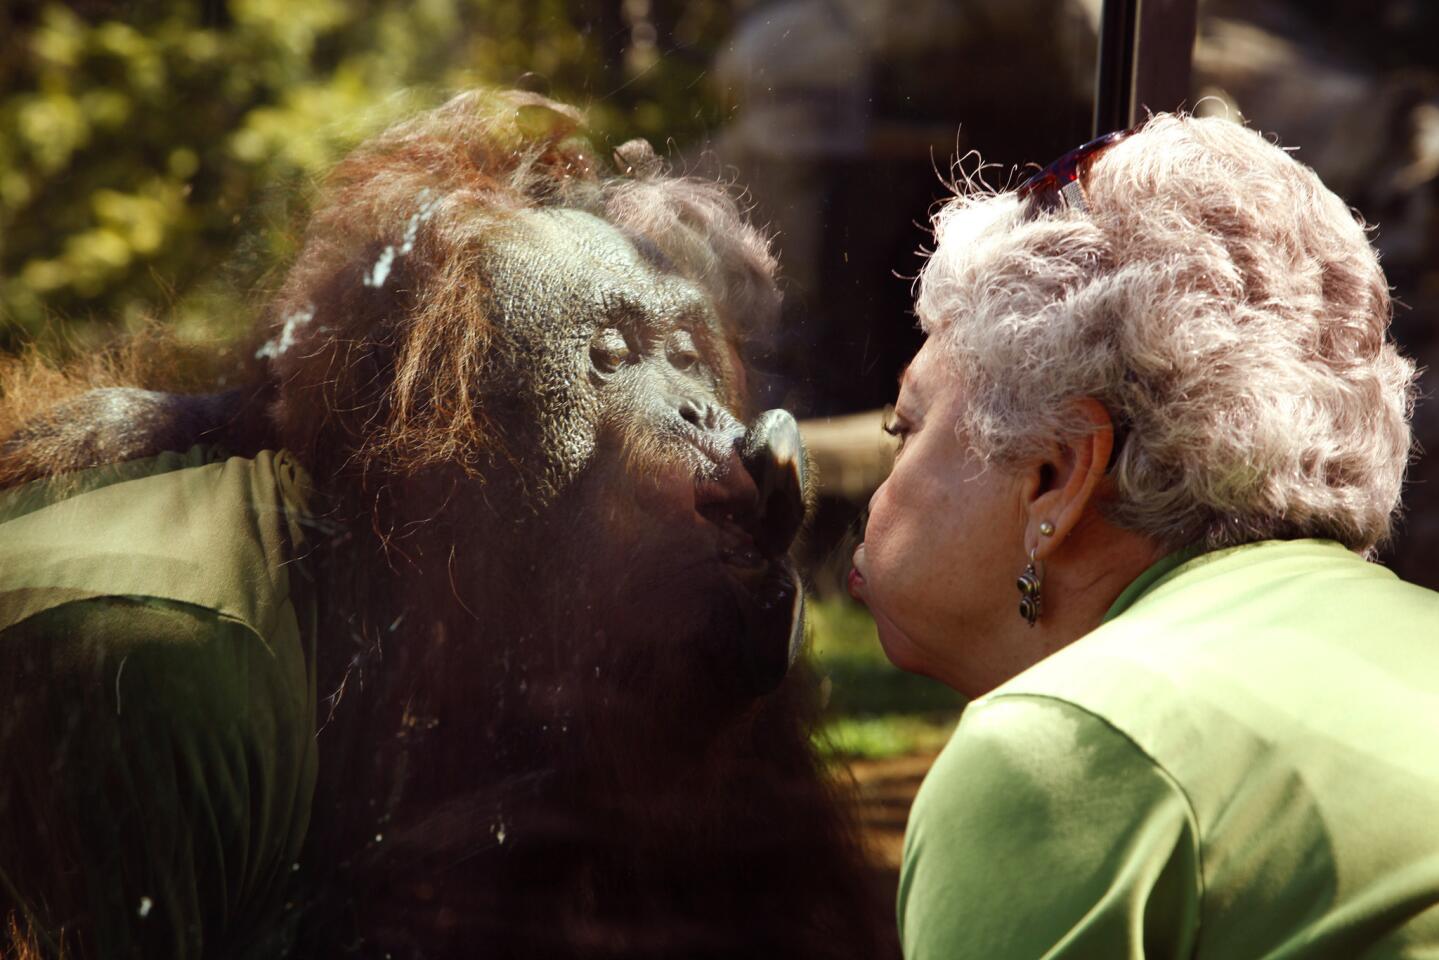 Zoo regular Sandy Lewis exchanges kisses behind the glass with her favorite orangutan, Janey, at the San Diego Zoo. Lewis visits Janey on a regular basis, spending time making hand gestures and communicating with their own language.